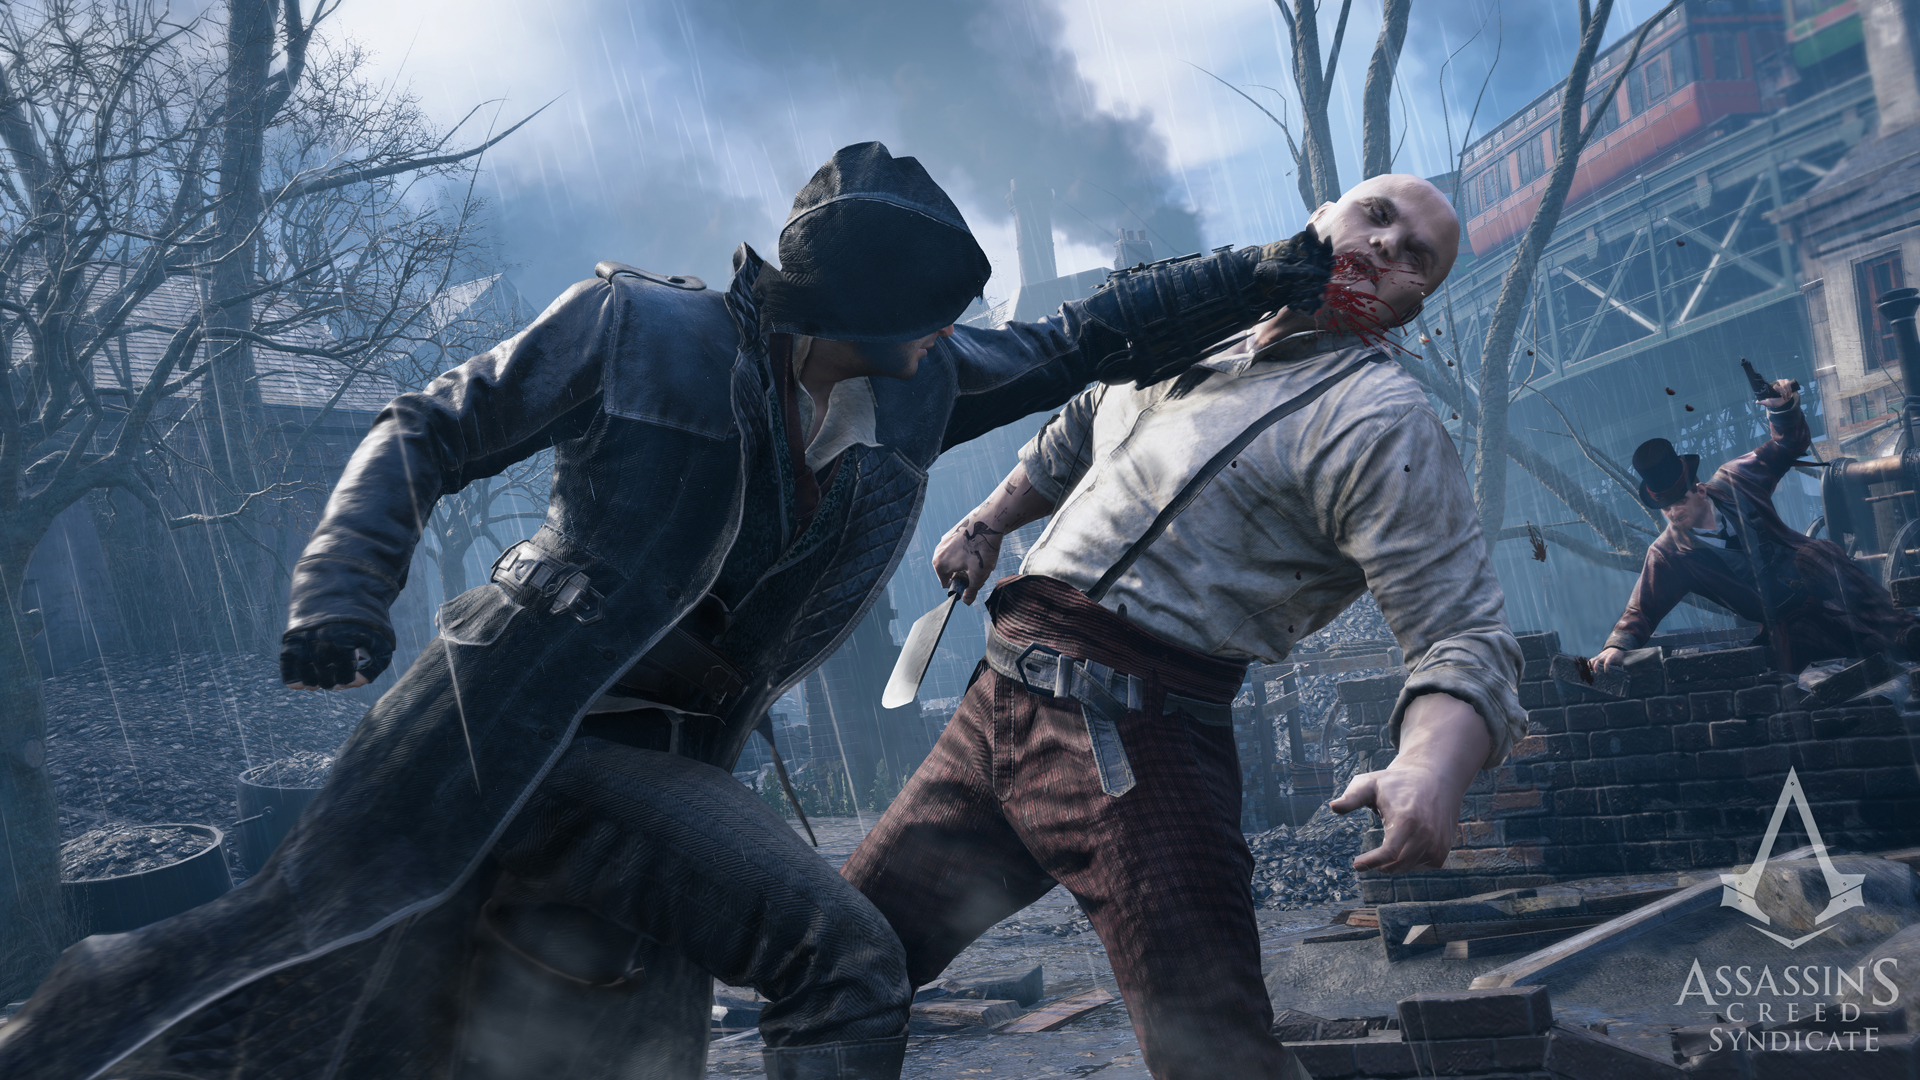 assassin's creed, video game, assassin's creed: syndicate, jacob frye 4K for PC